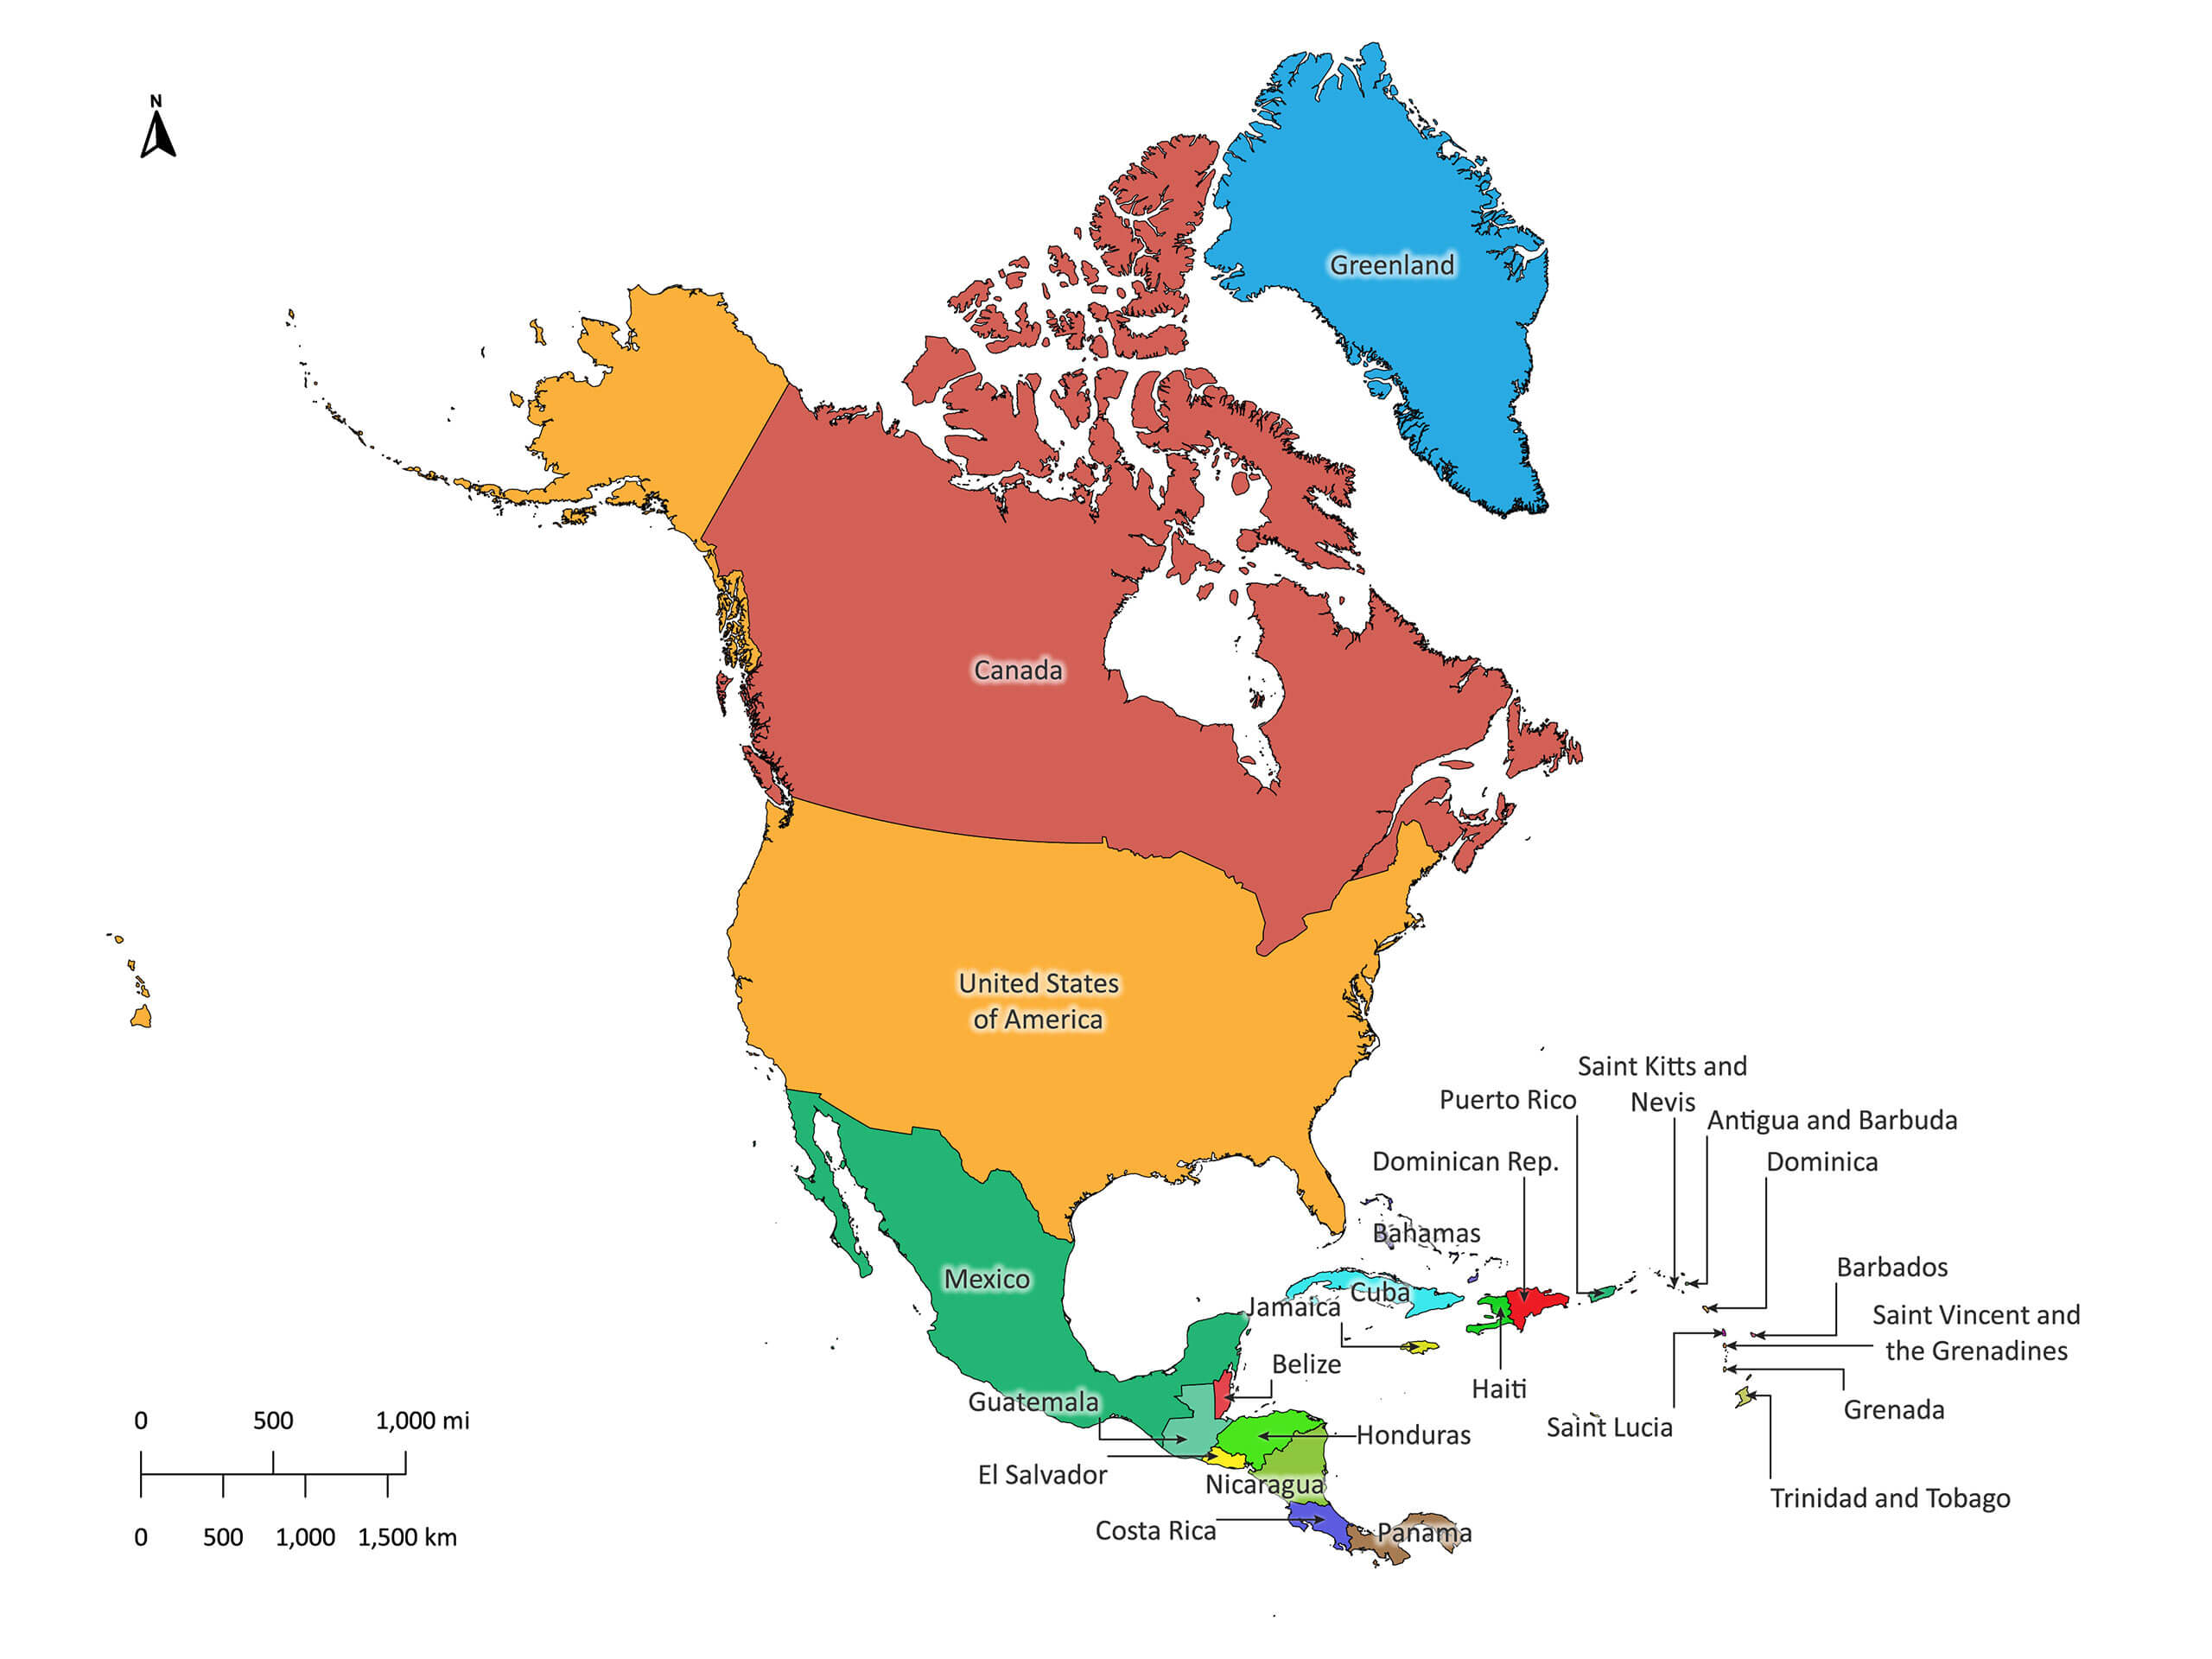 Colorful North America political map with clearly labeled